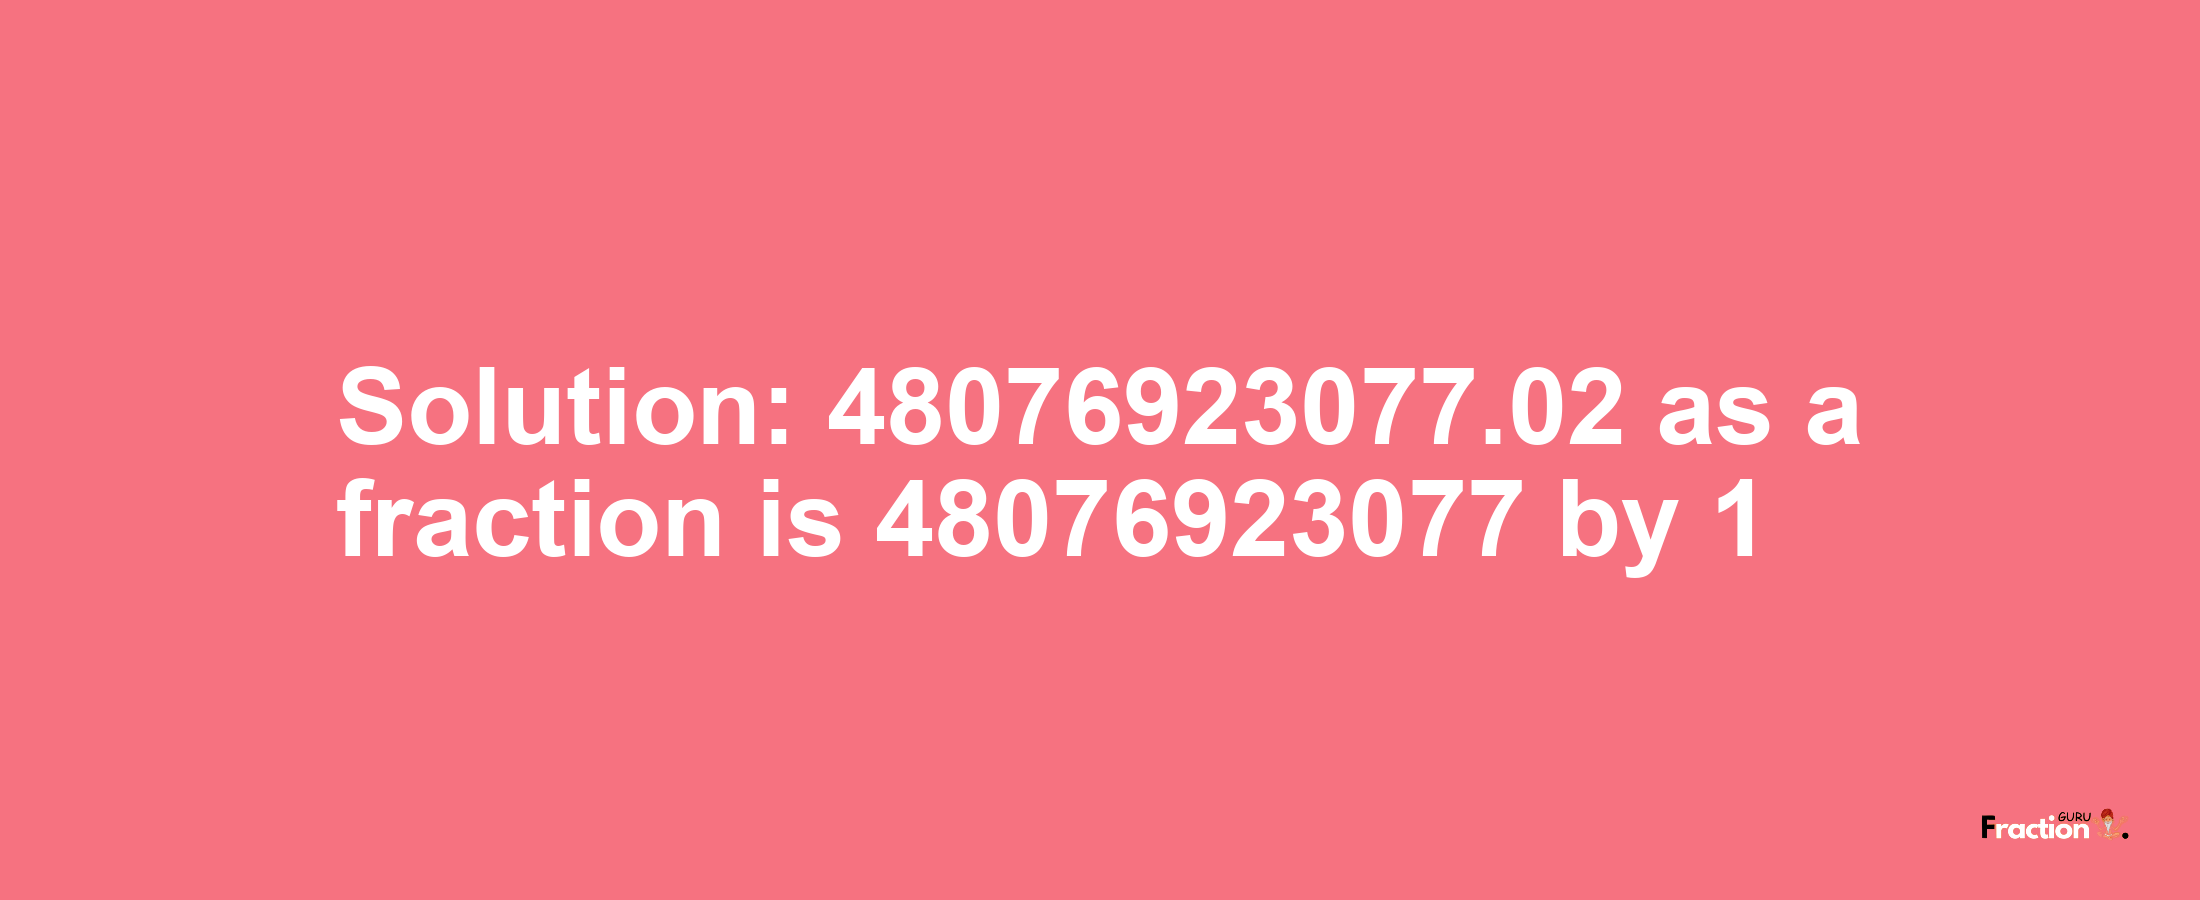 Solution:48076923077.02 as a fraction is 48076923077/1